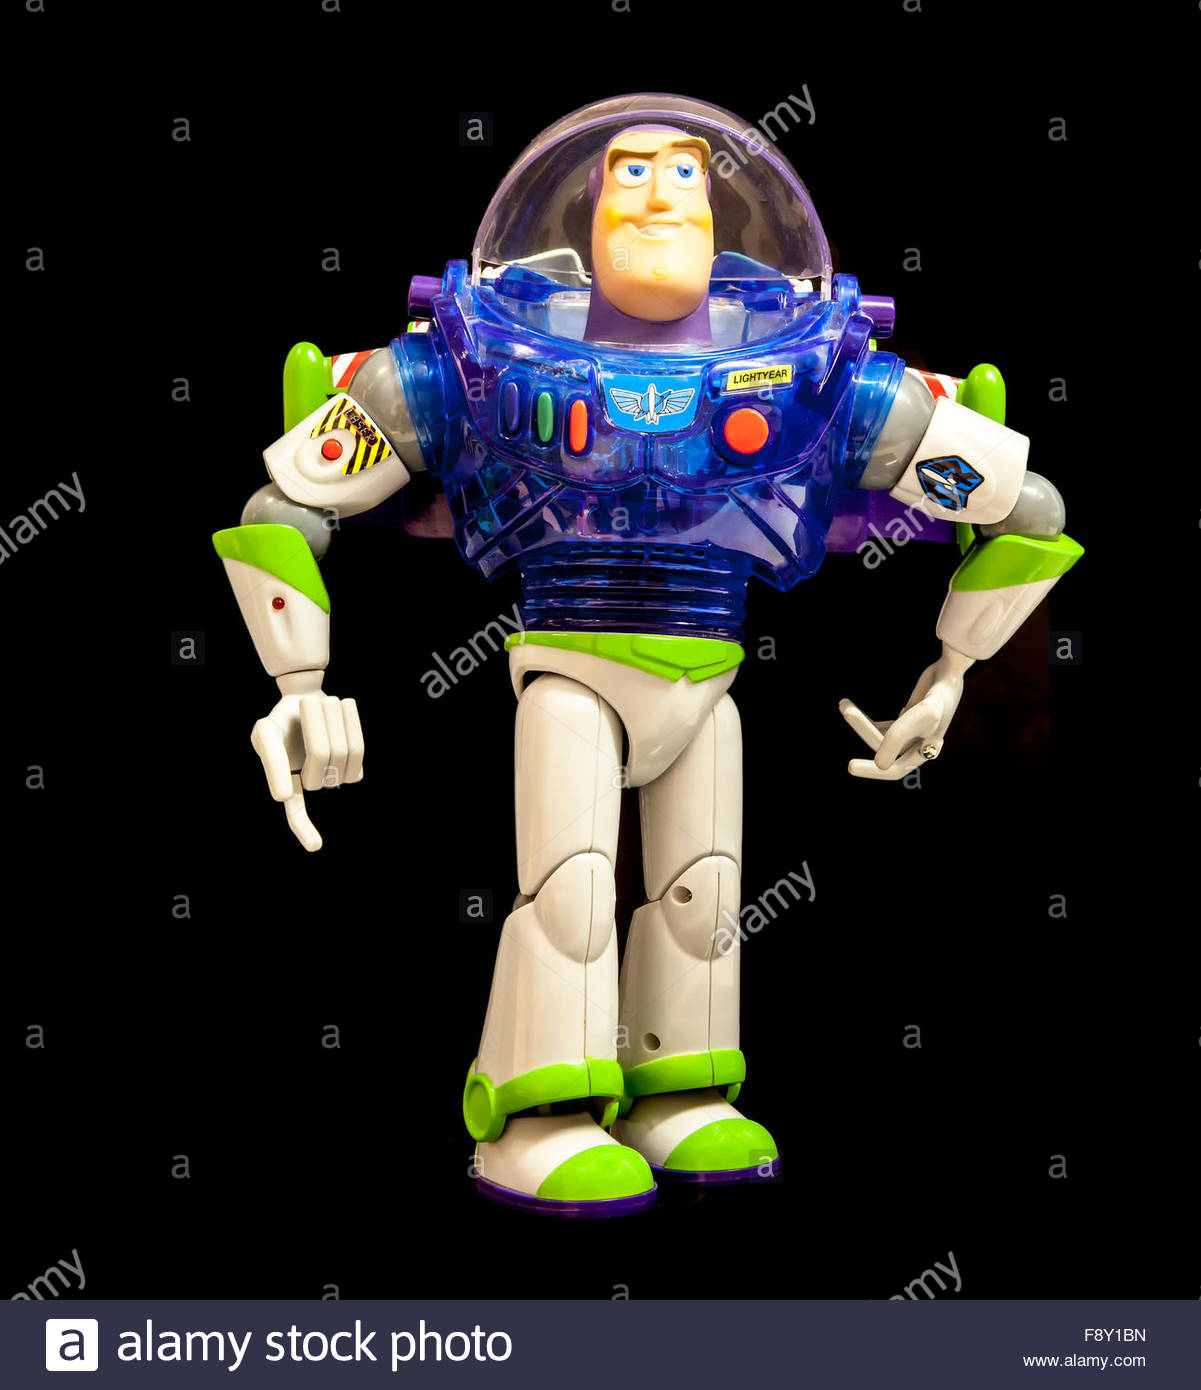 Buzz Lightyear from Disneys Toy Story 2 on a Black Background